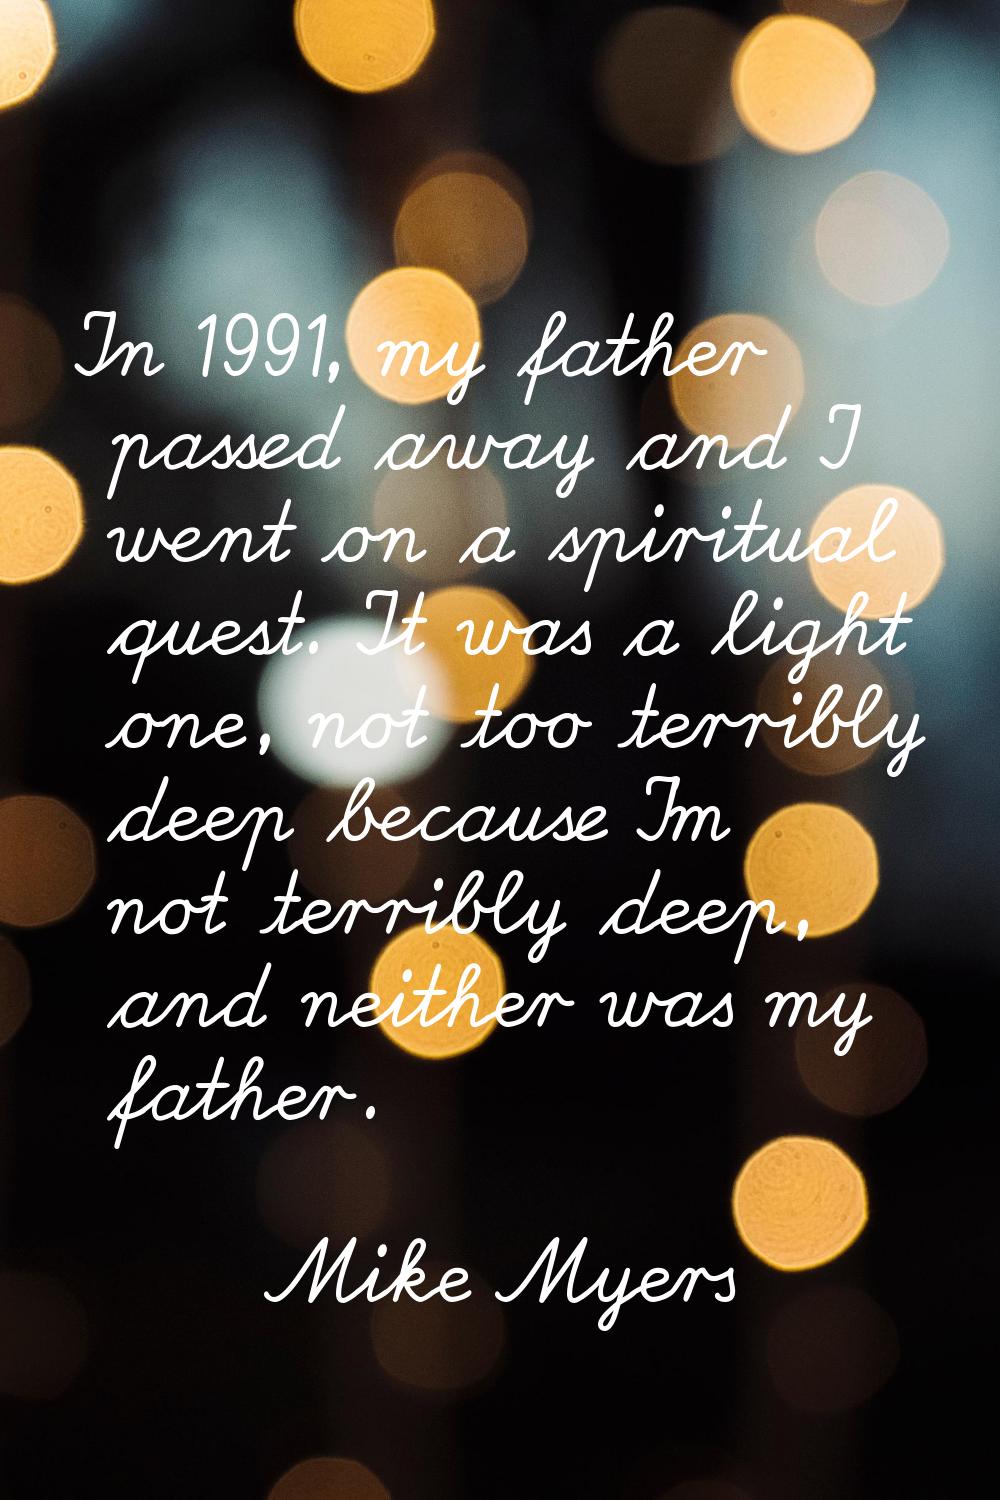 In 1991, my father passed away and I went on a spiritual quest. It was a light one, not too terribl